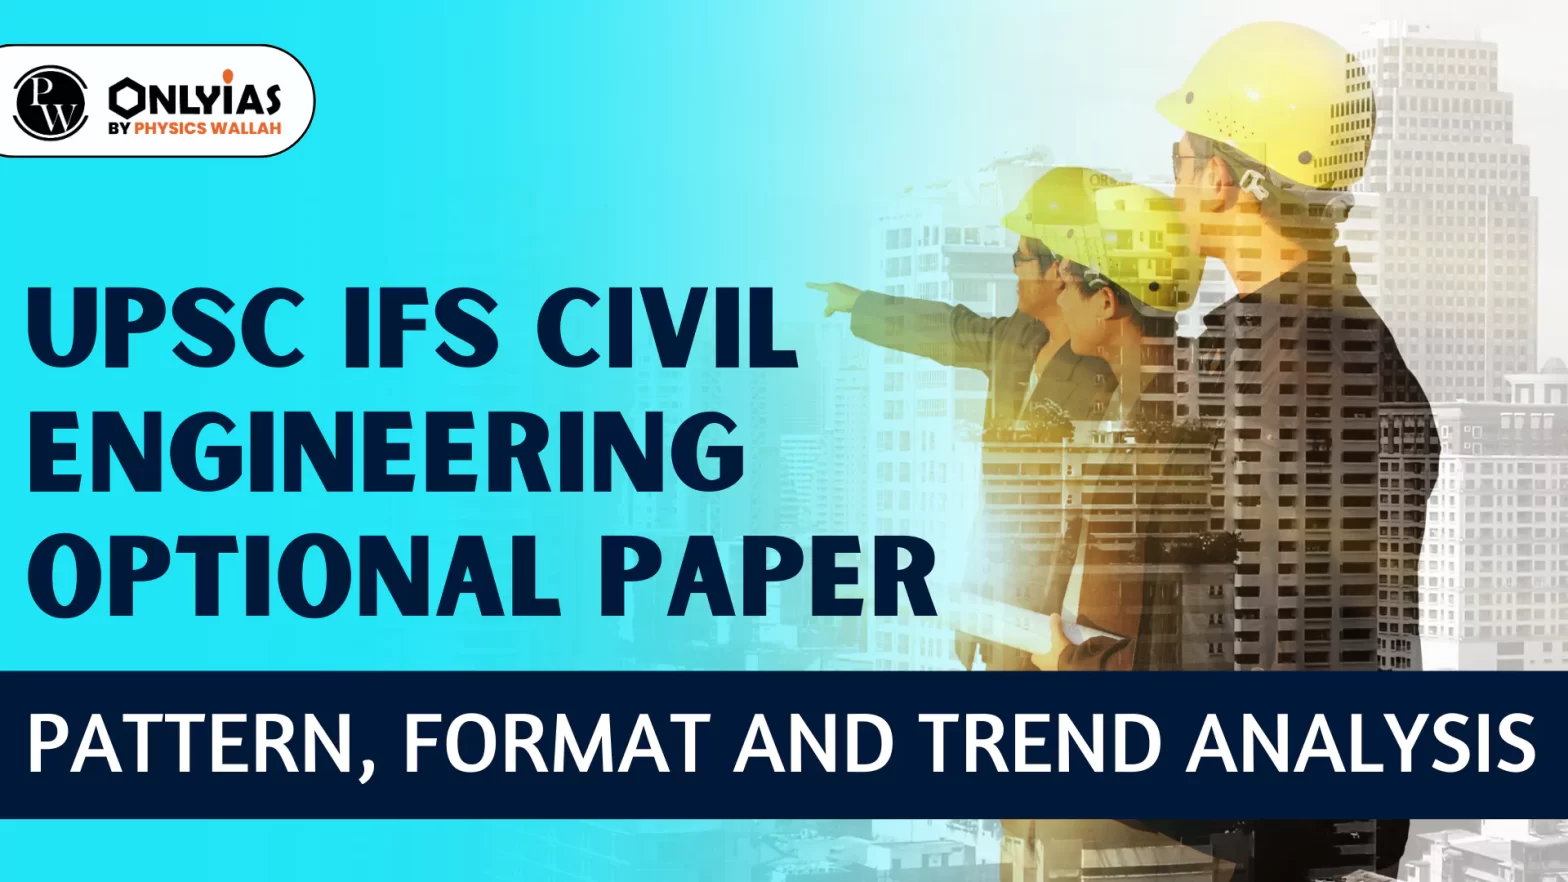 UPSC IFS Civil Engineering Optional Paper: Pattern, Format and Trend Analysis